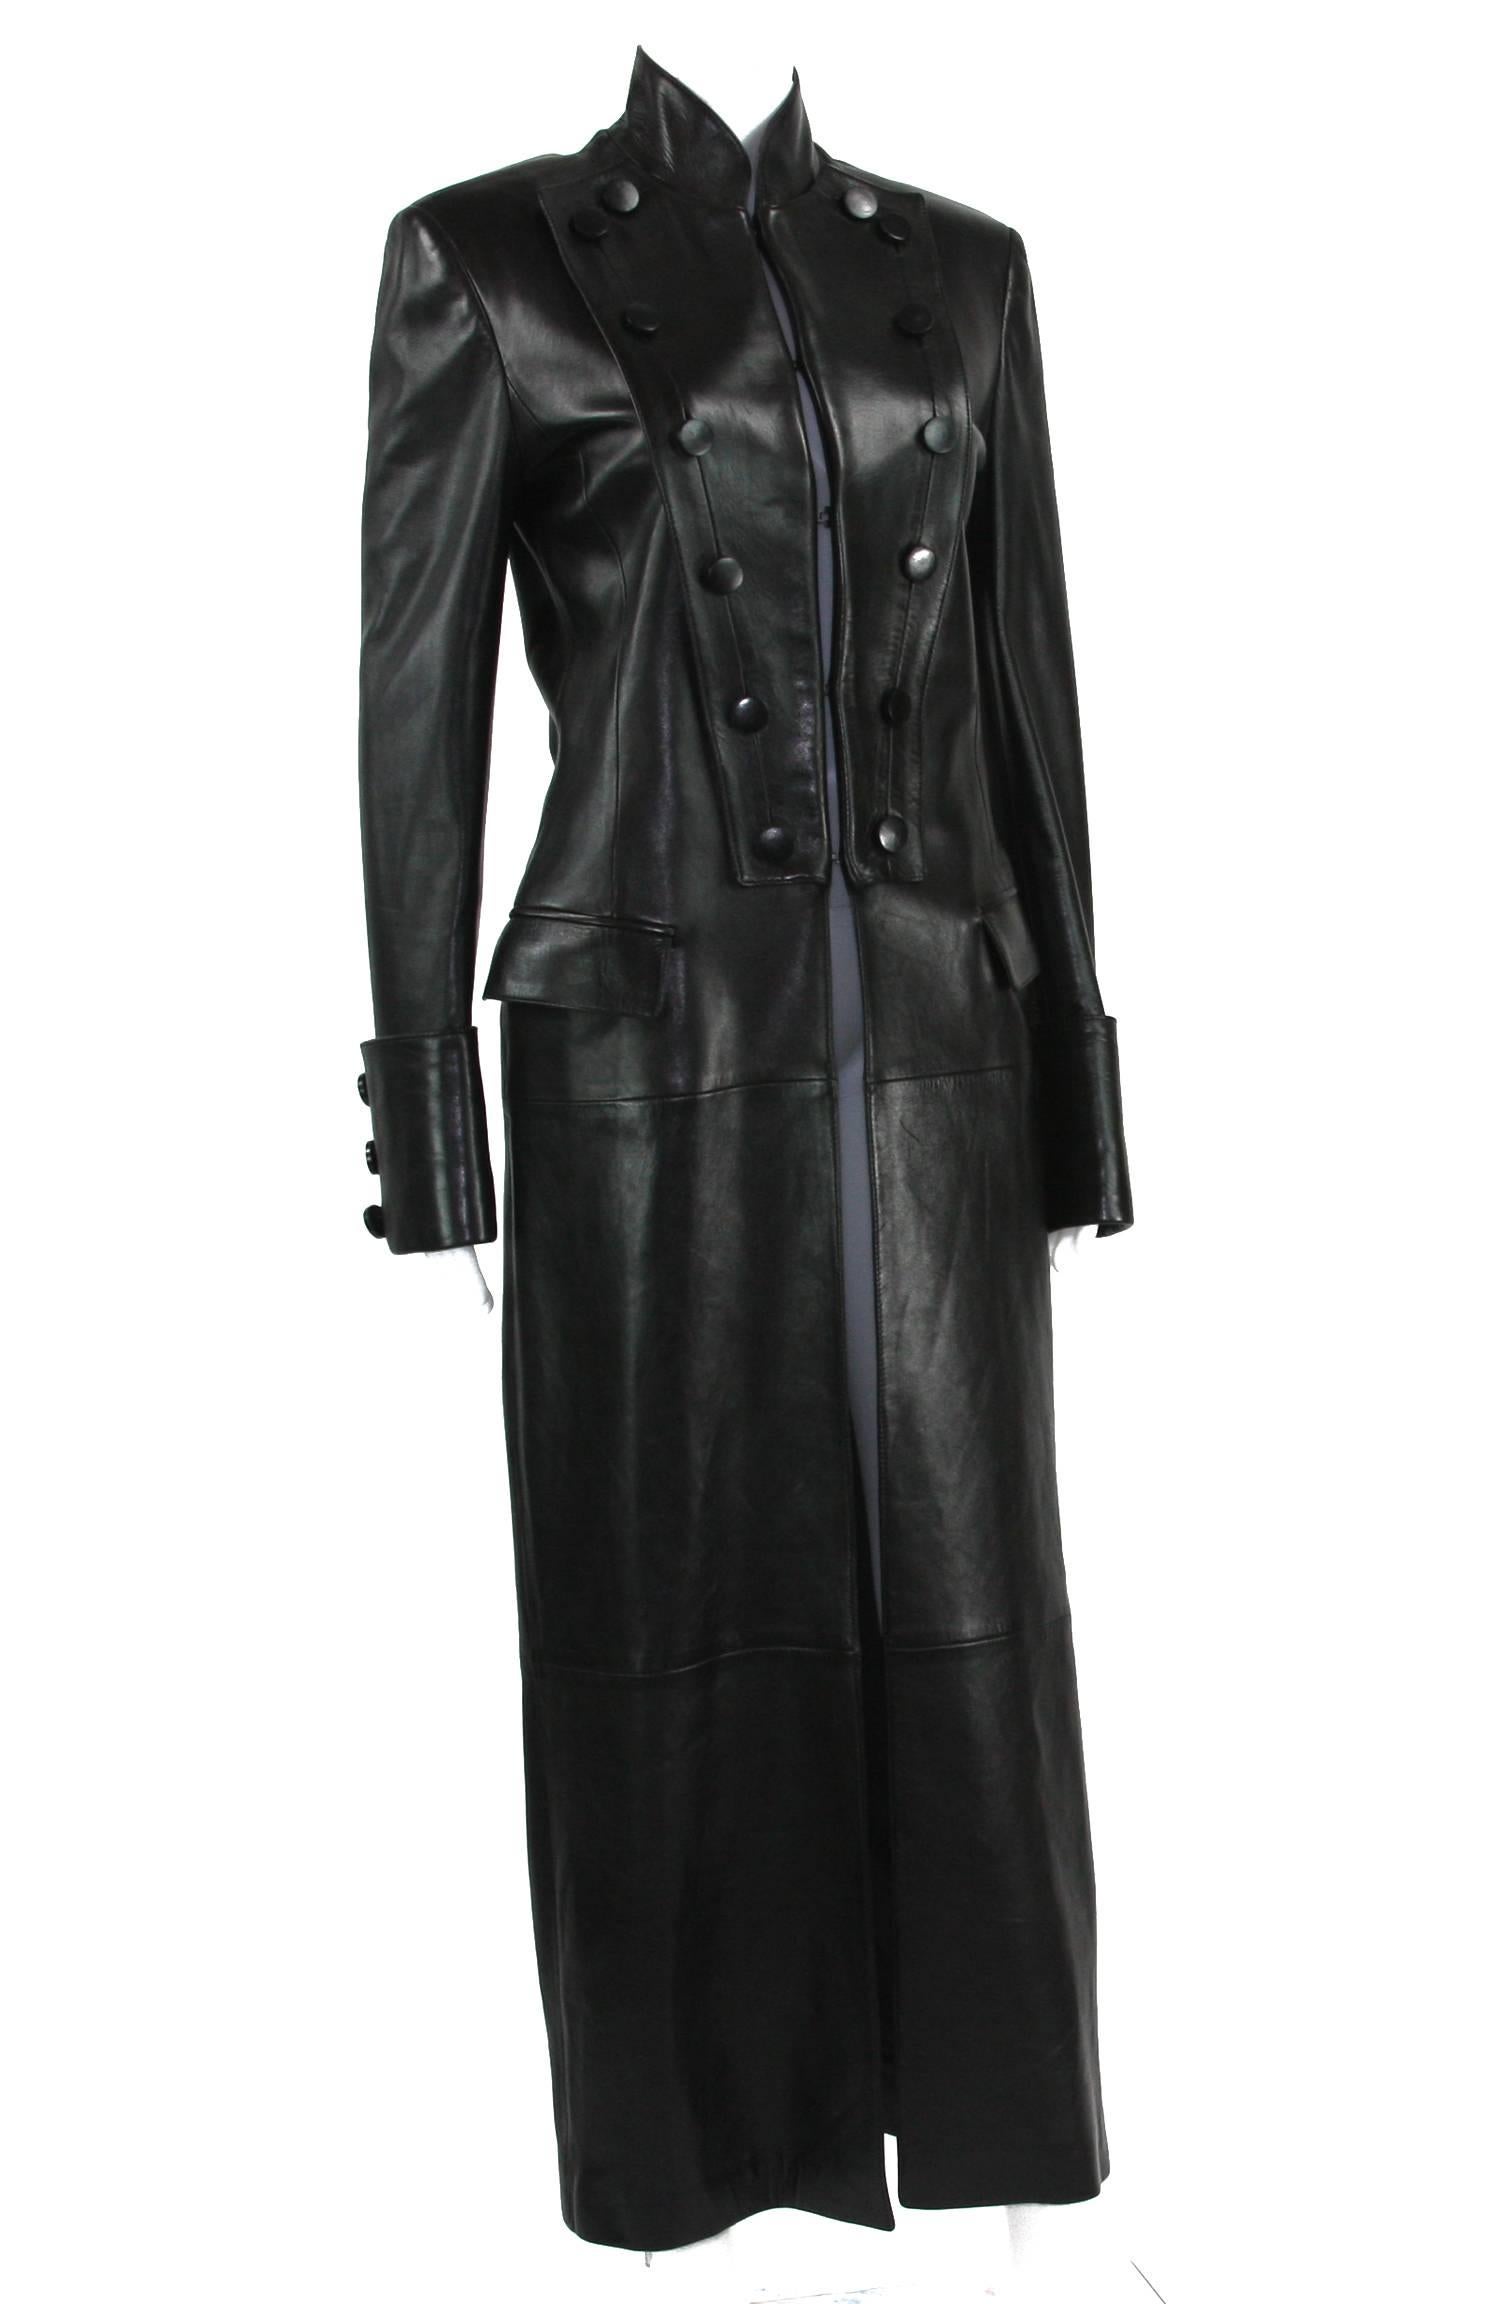 Tom Ford for Yves Saint Laurent F/W 2001 Black Leather Long Military ...